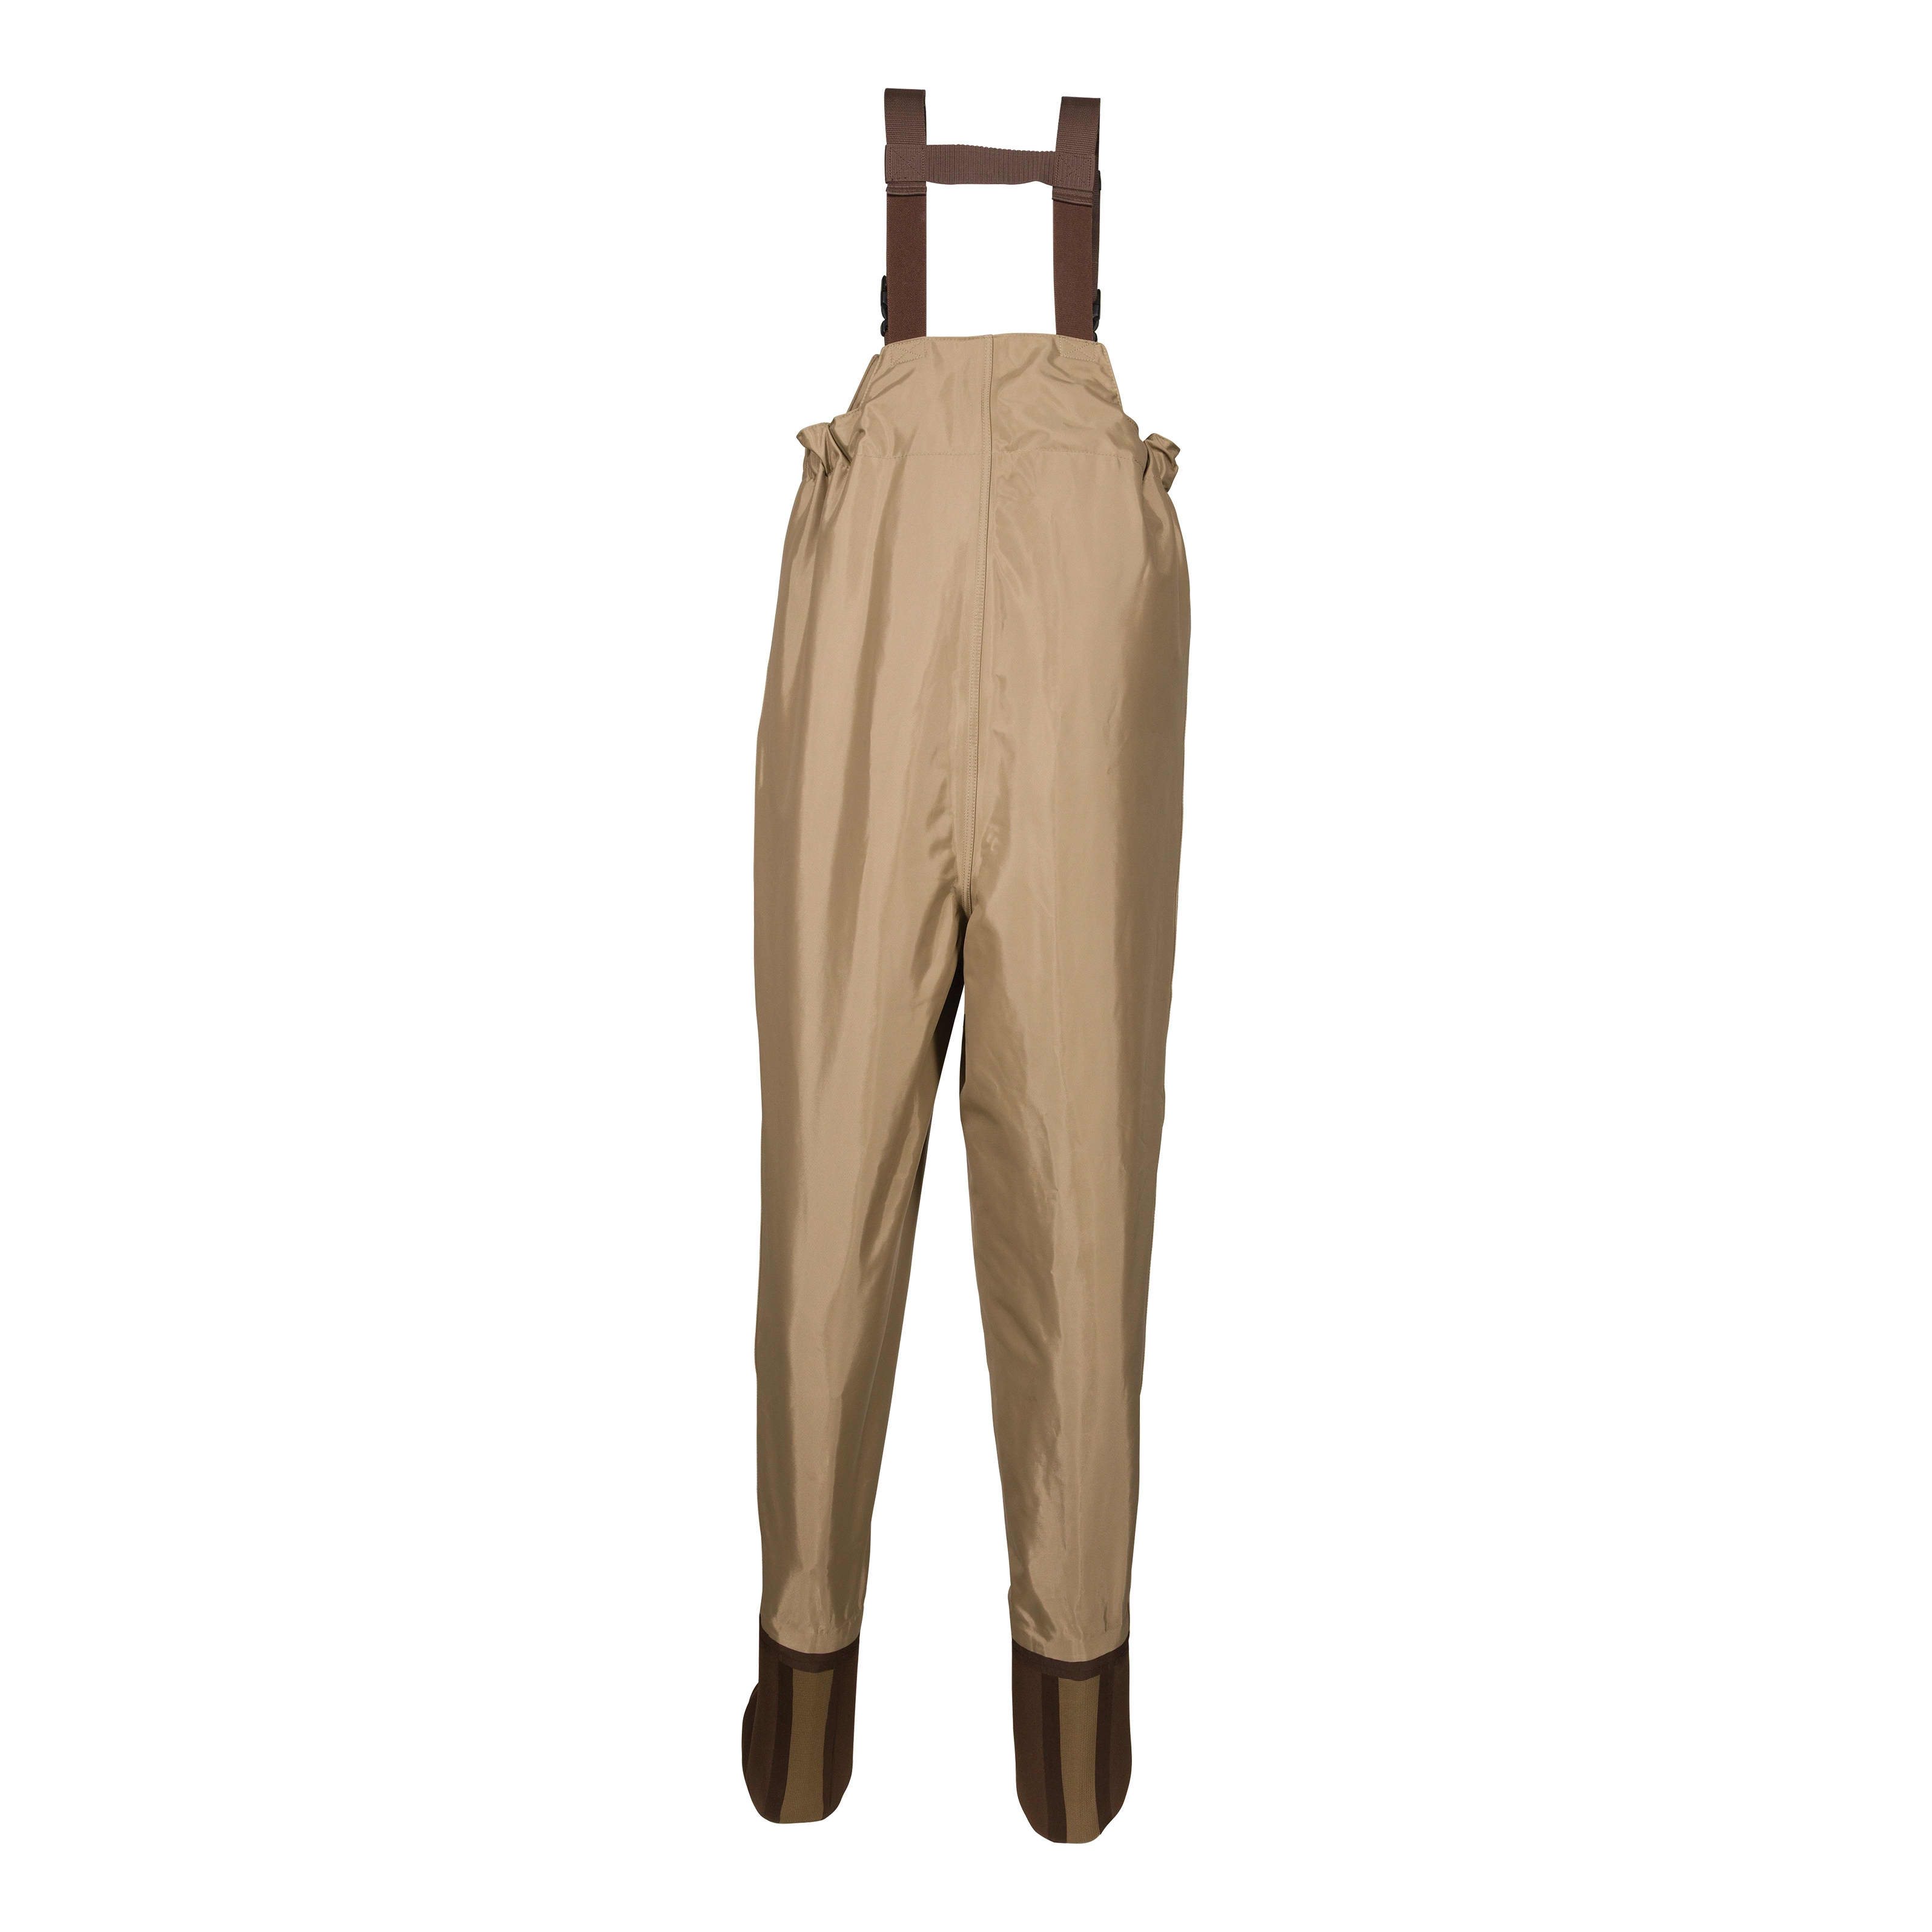 White River Fly Shop® Men’s Three Forks Stocking-Foot Chest Waders - back